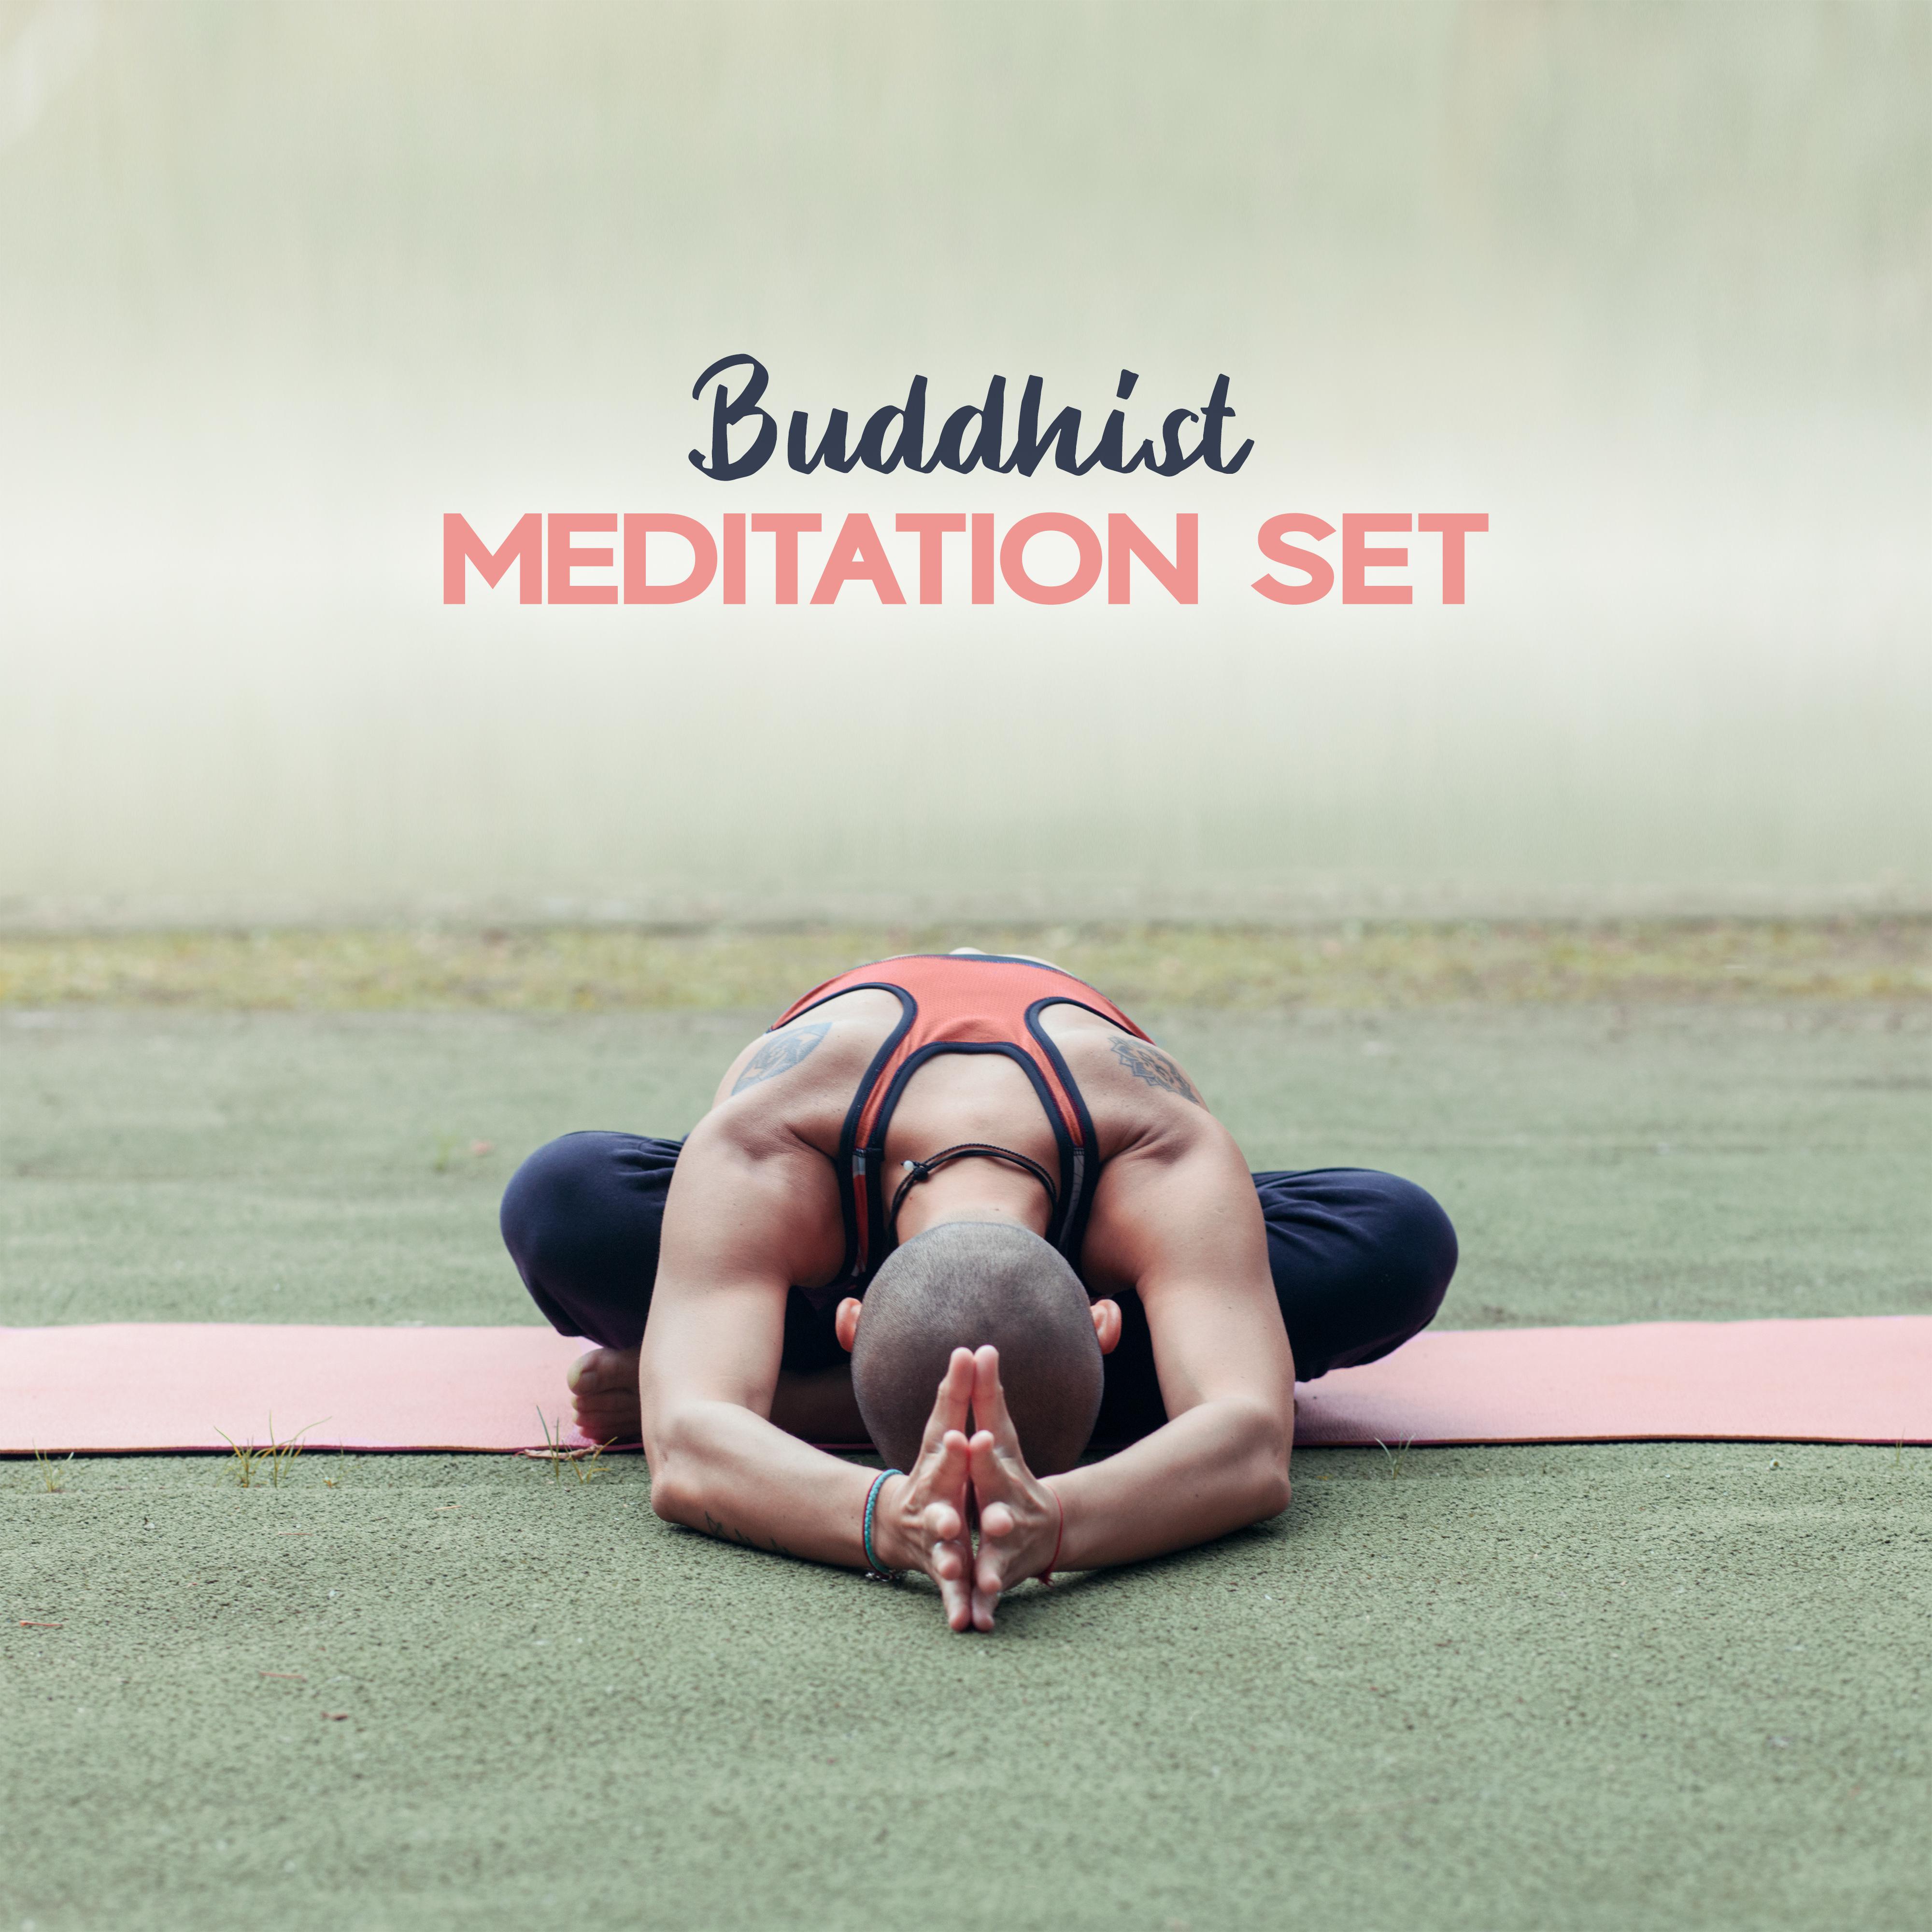 Buddhist Meditation Set - for Zen Meditation, Yoga Practice, Unblocking and Purifying the Chakras, Relieving Stress, Tension and Anger, Relaxing Ambient Music for Deep Meditation